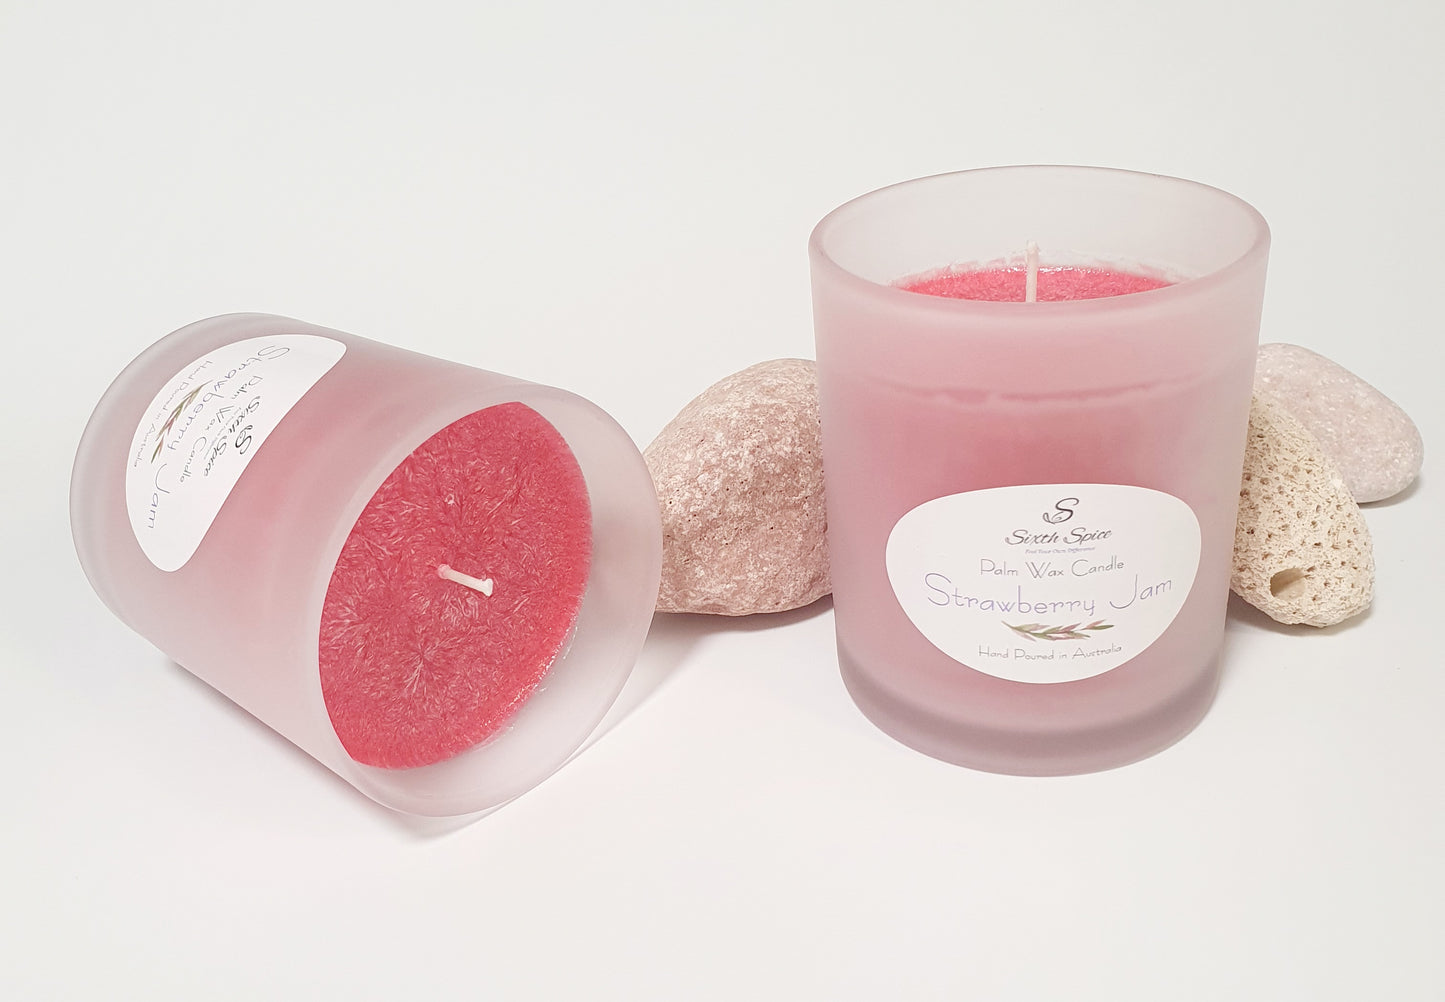 Strawberry Jam Scented Large Palm Wax Candle